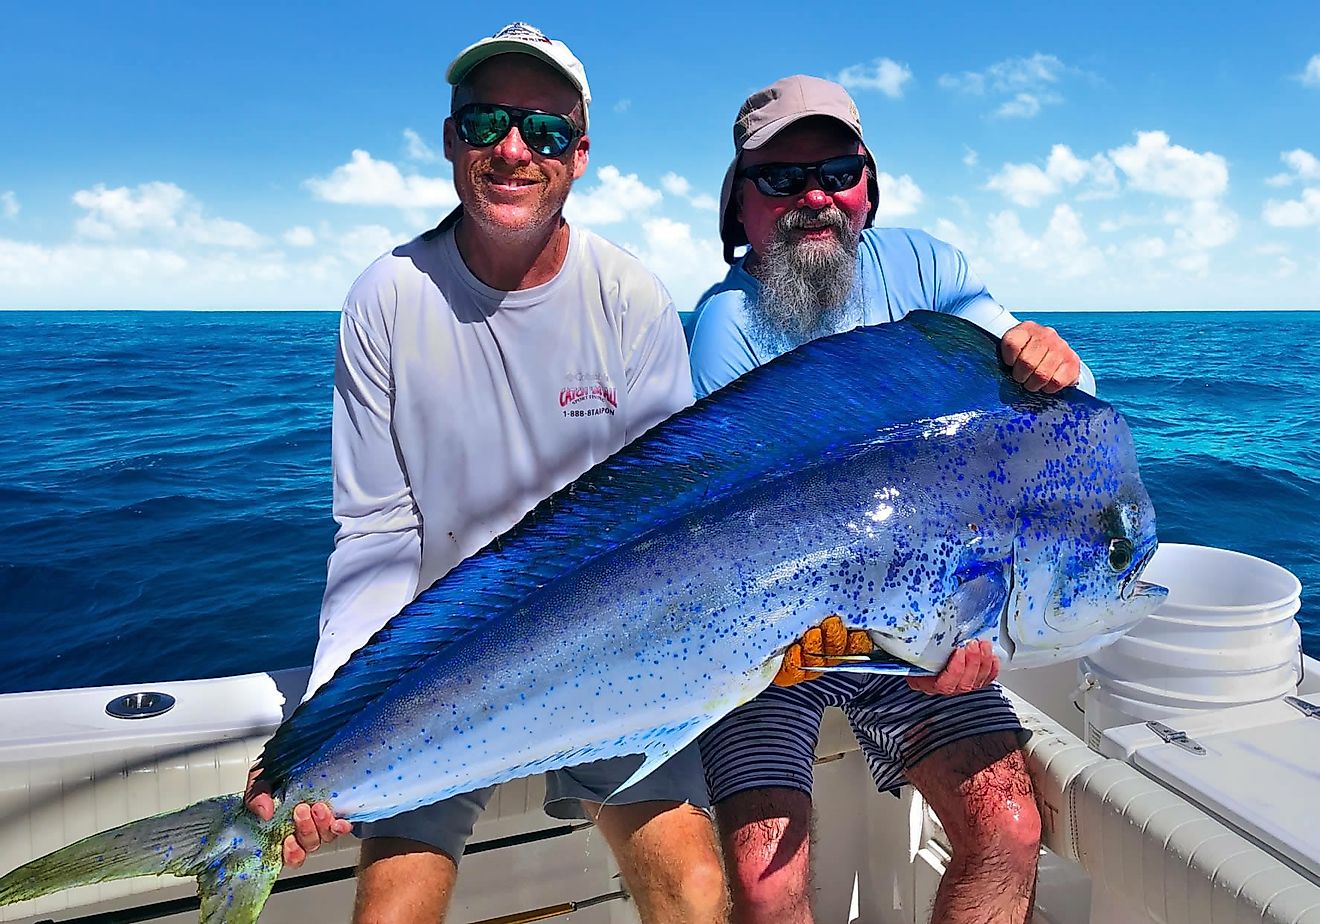 Catch the Best Deep Sea Fishing: What Kind of Fish Can You Find ...